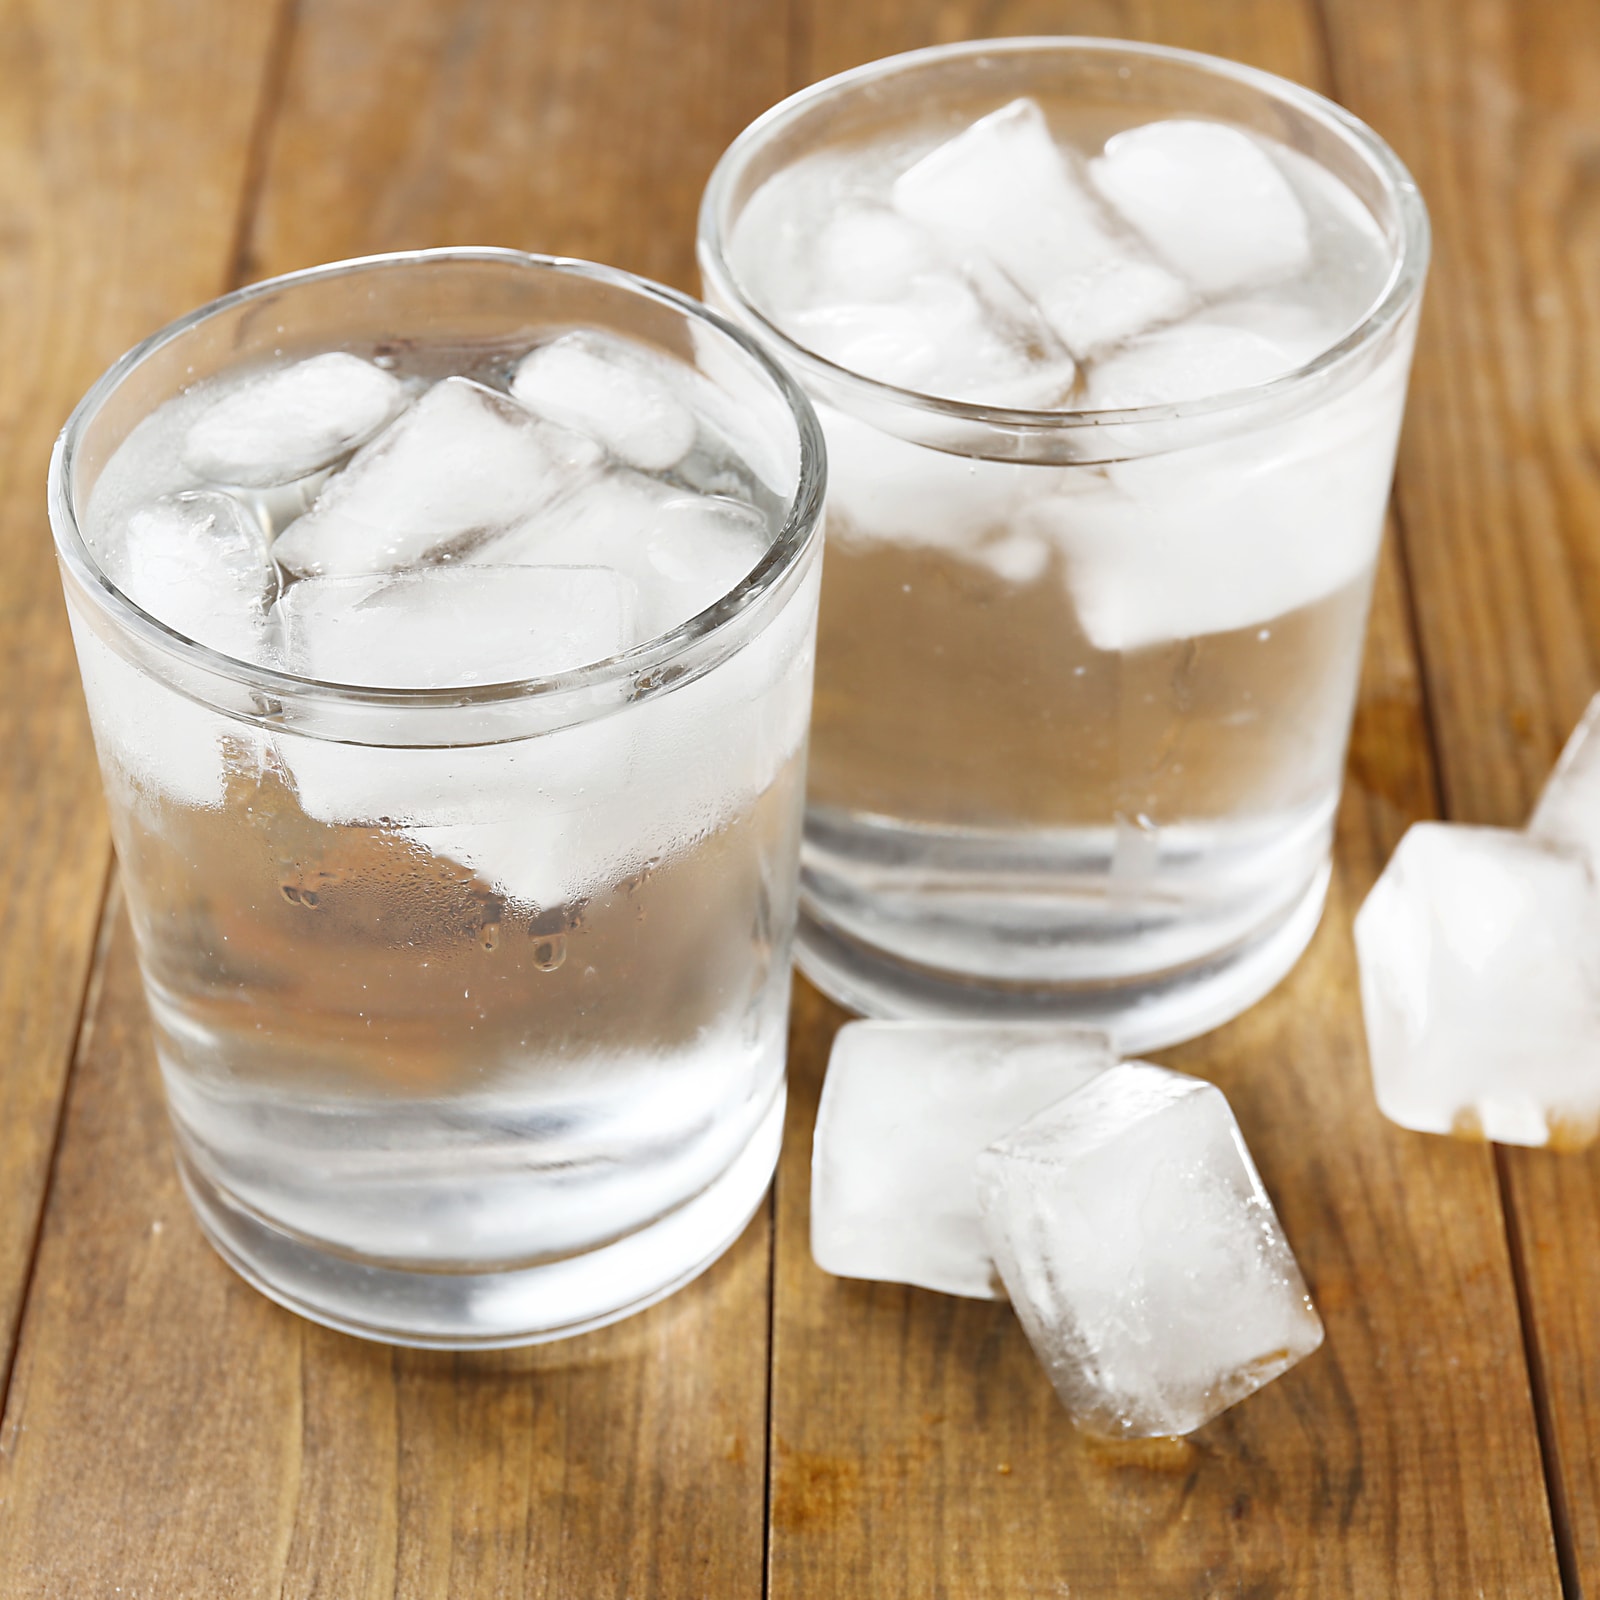 Cold water: 5 reasons why we love drinking it